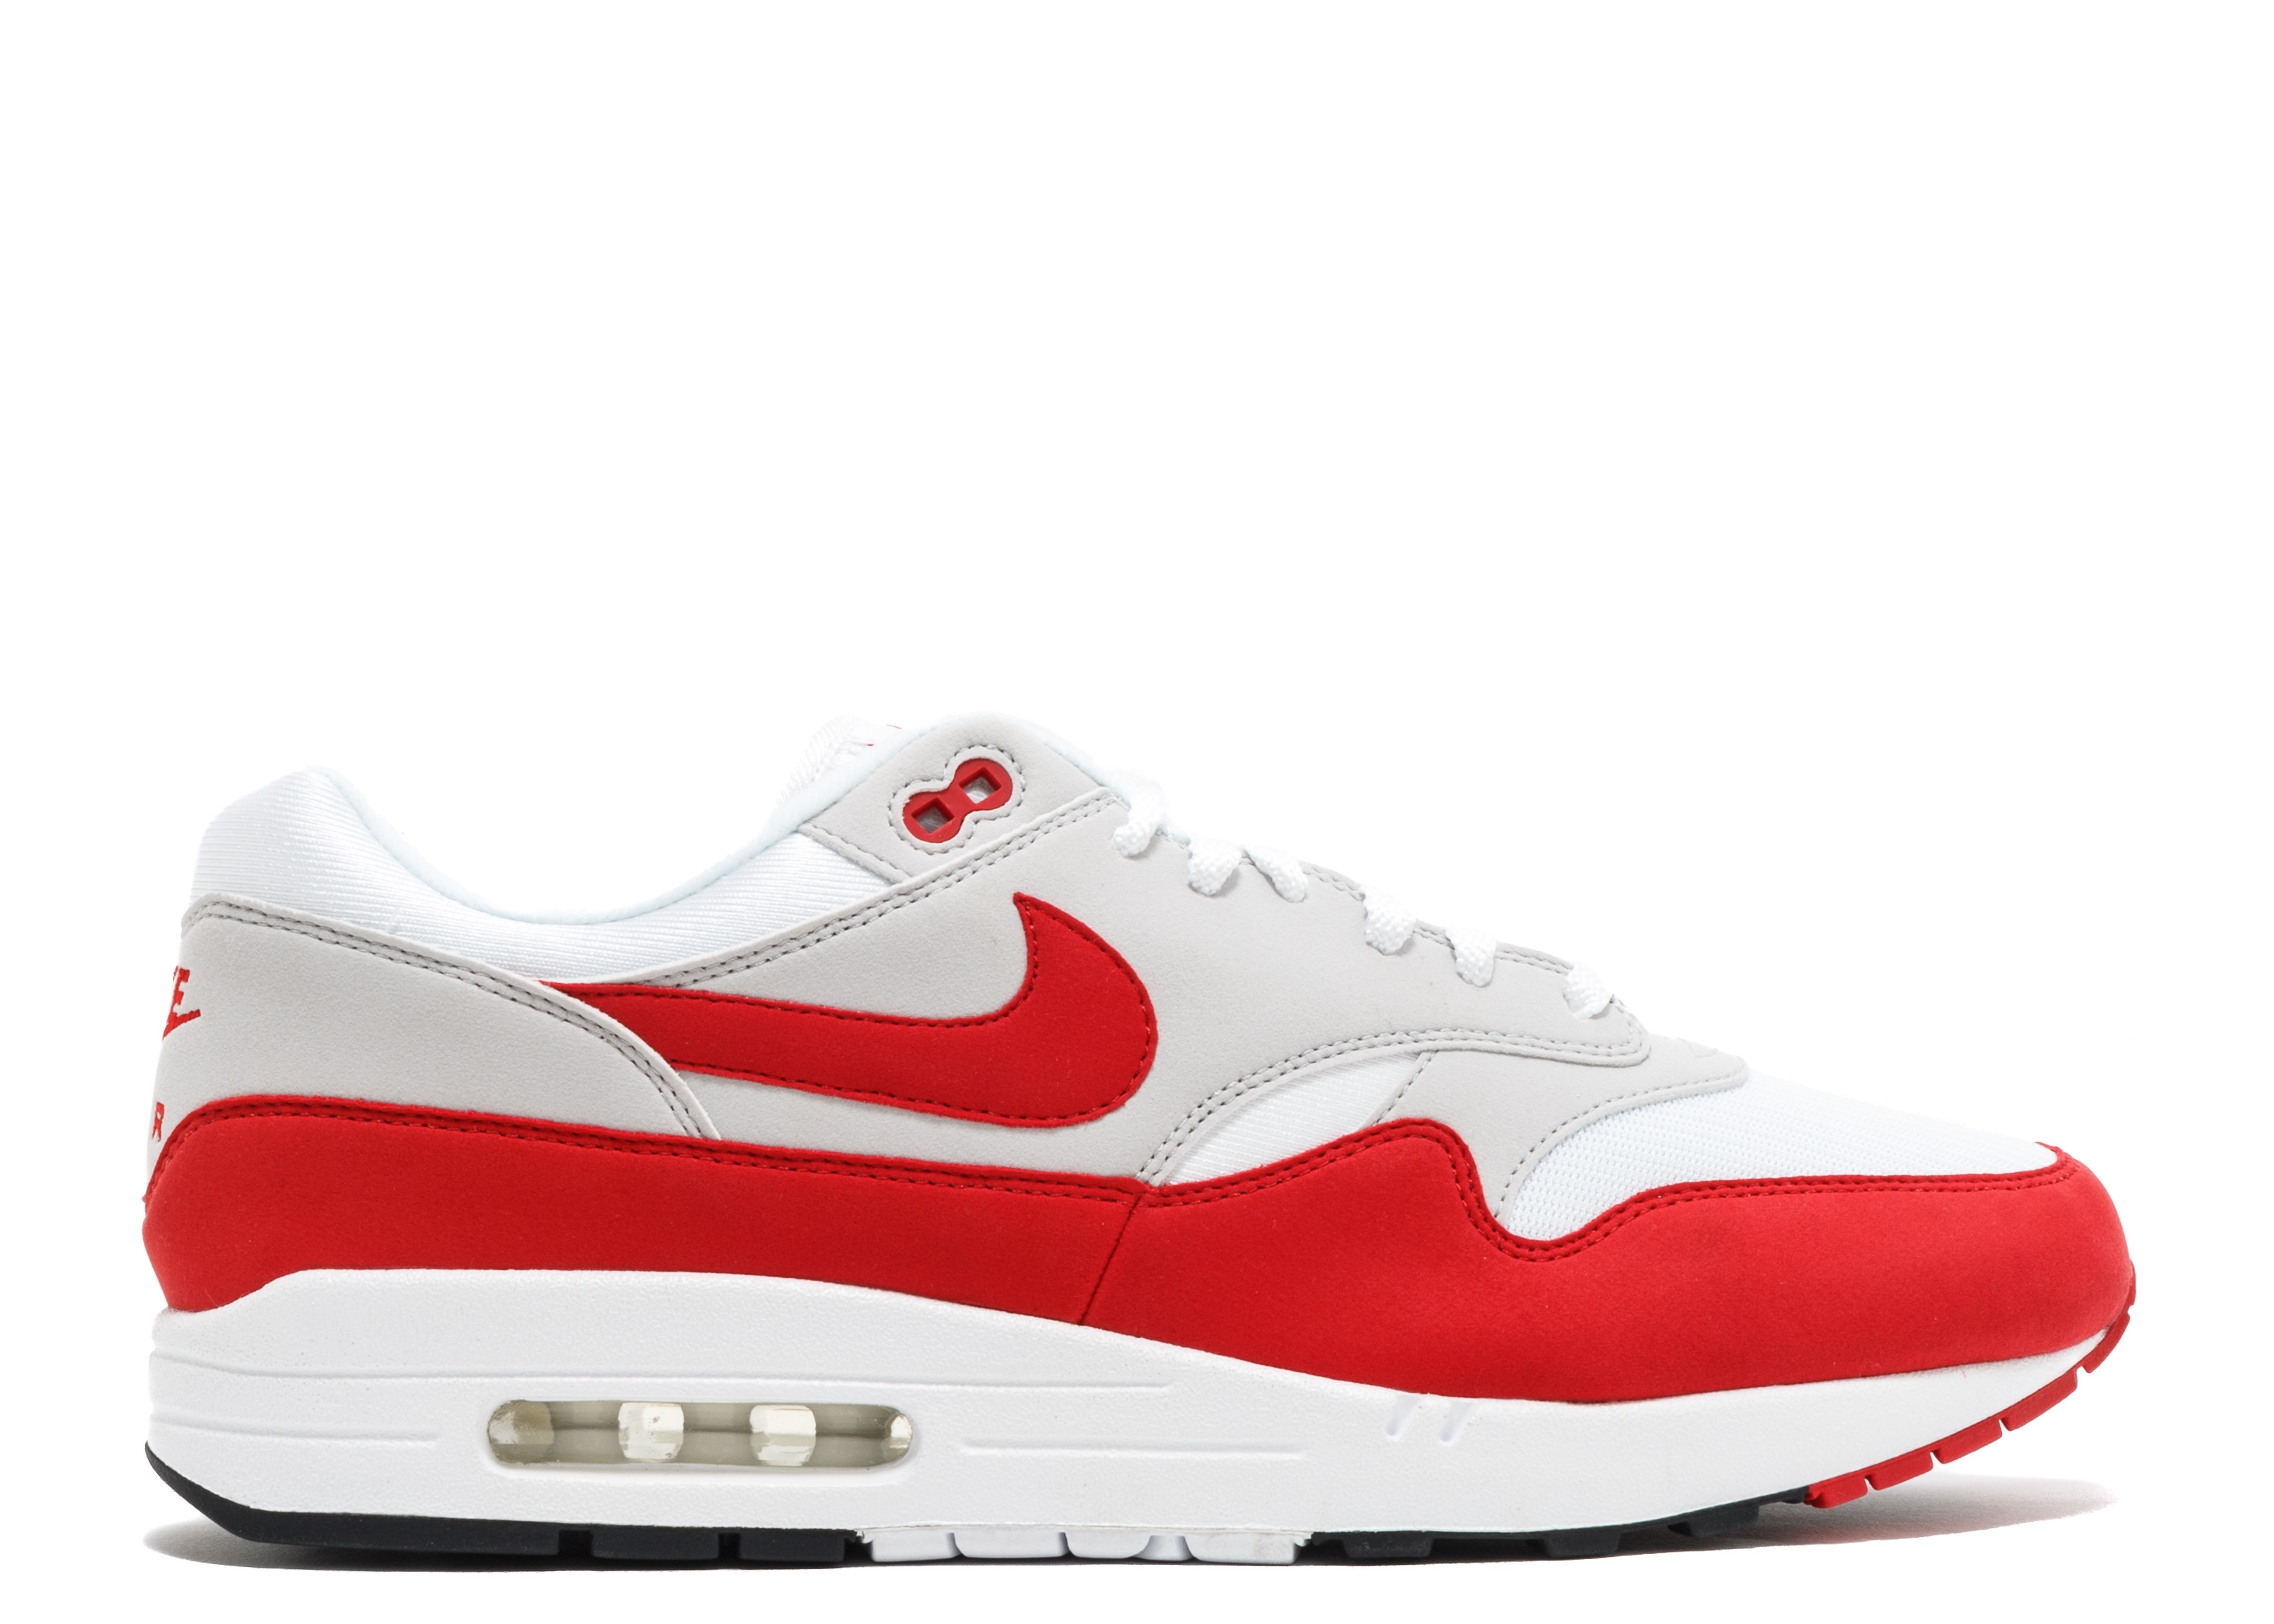 Honesty And Surrounded Air Max 1 OG Anniversary 'Red' - Nike - 908375 100 - white/university red/neutral  grey/black | Flight Club